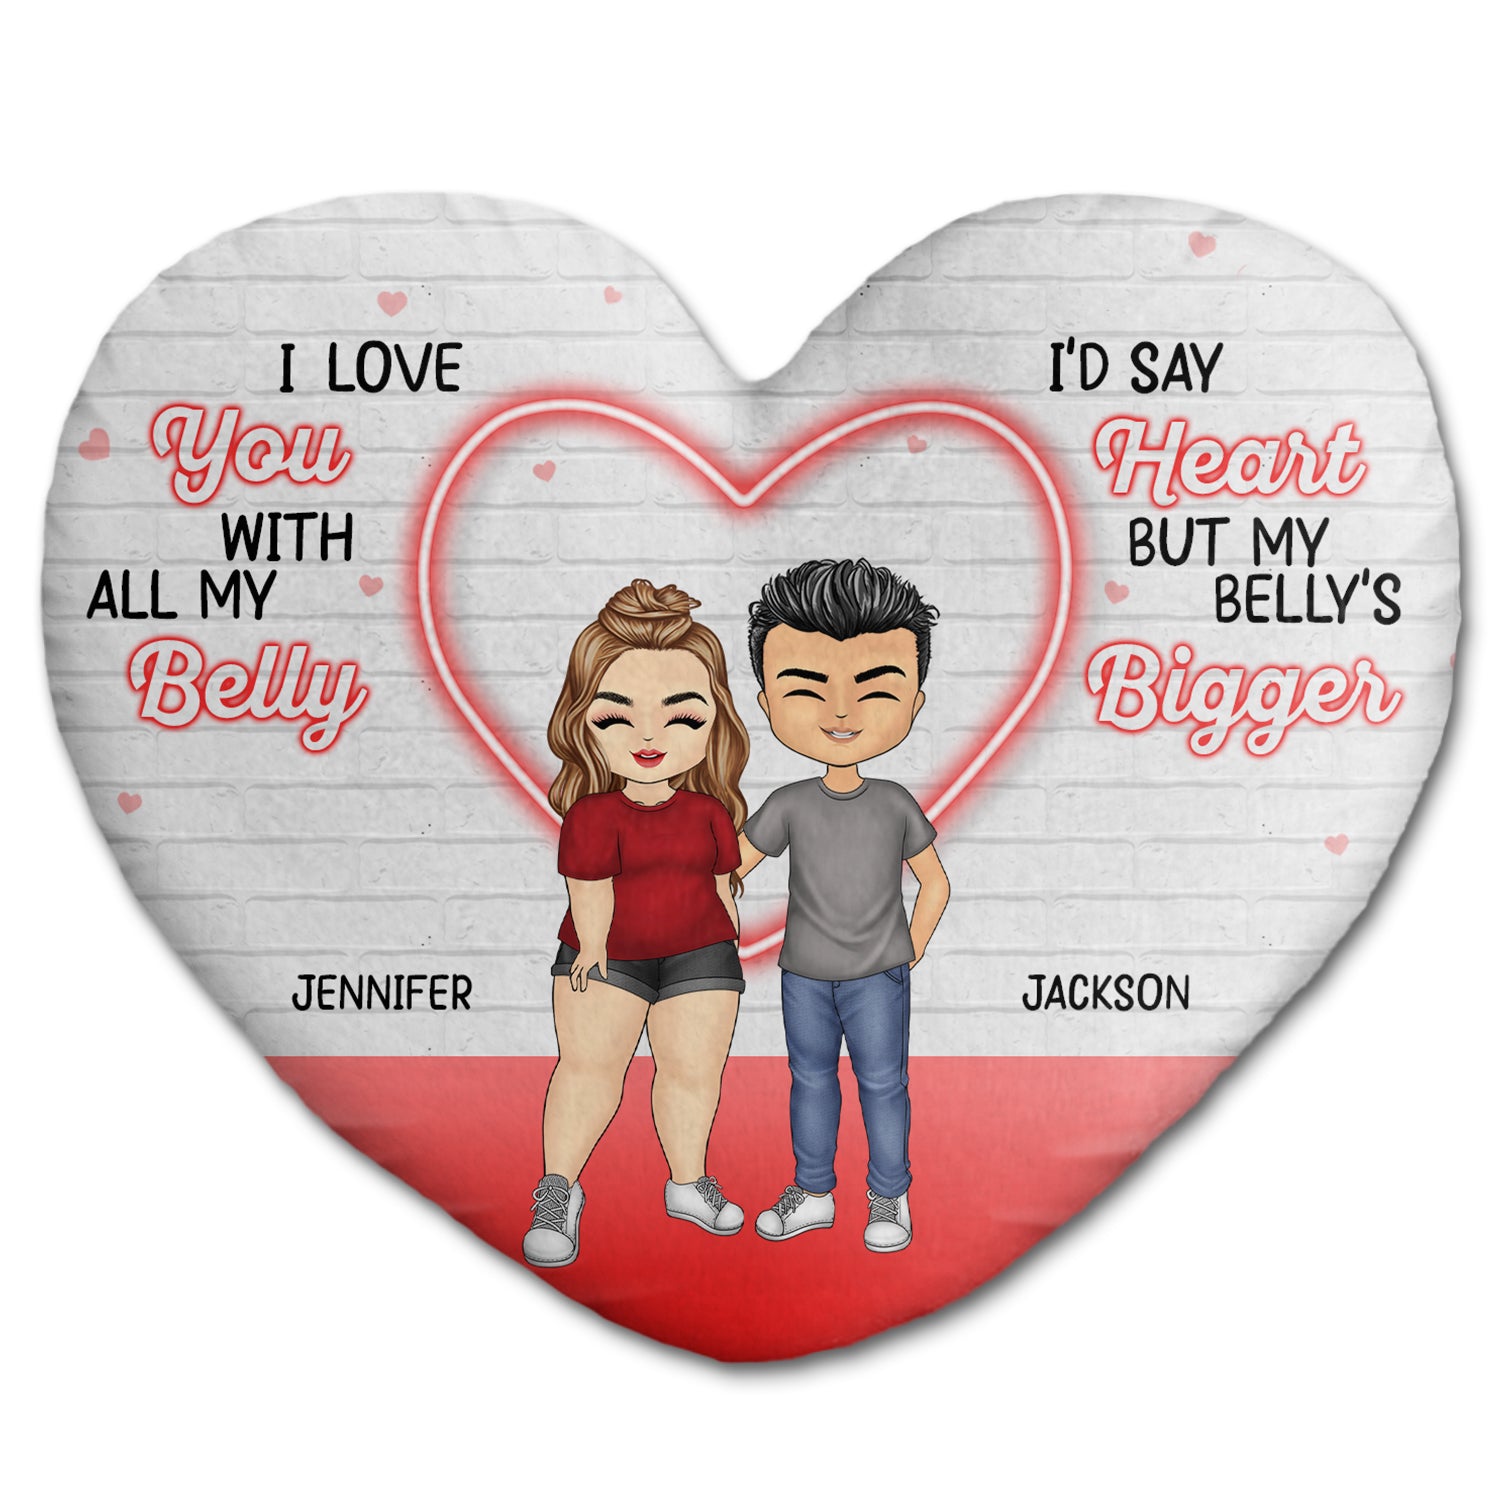 My Belly Is Bigger - Gift For Couples - Personalized Heart Shaped Pillow